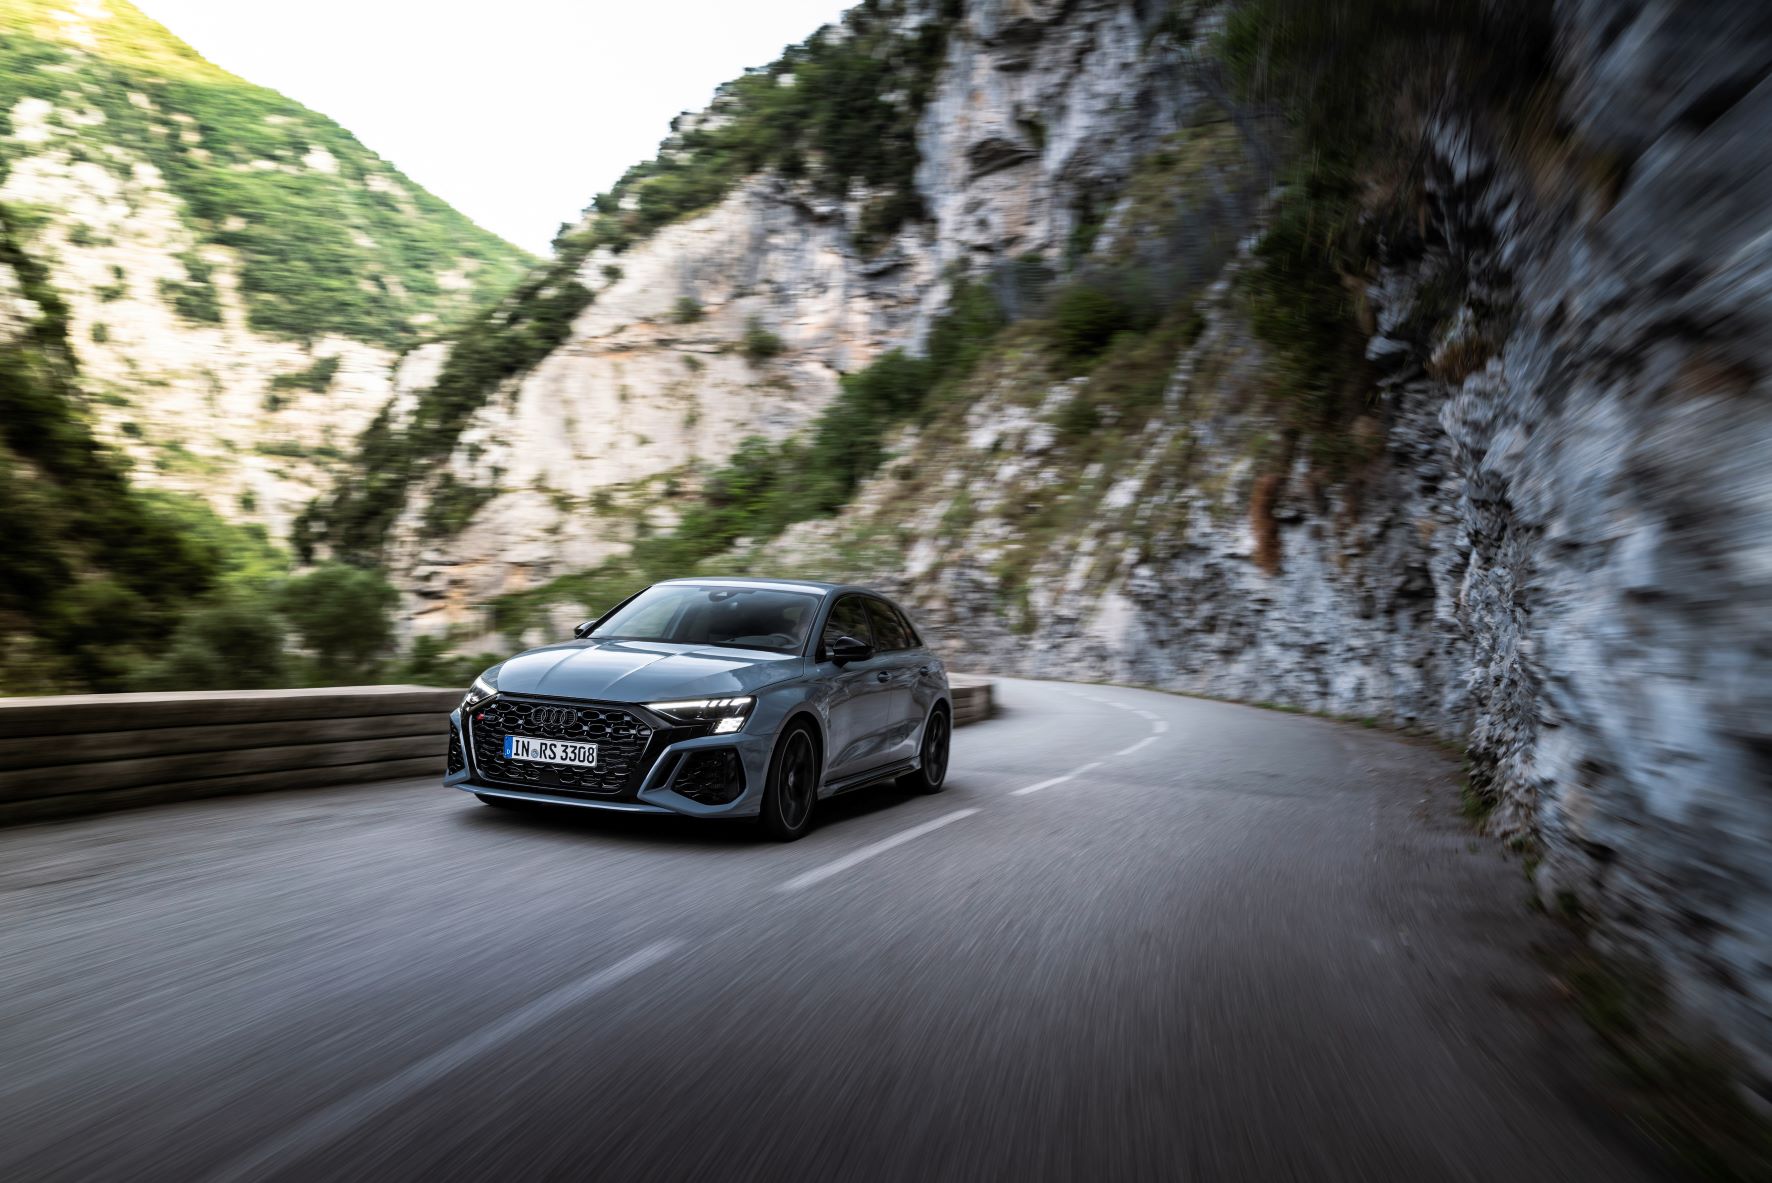 Moving shot of the new Audi RS3 sportback